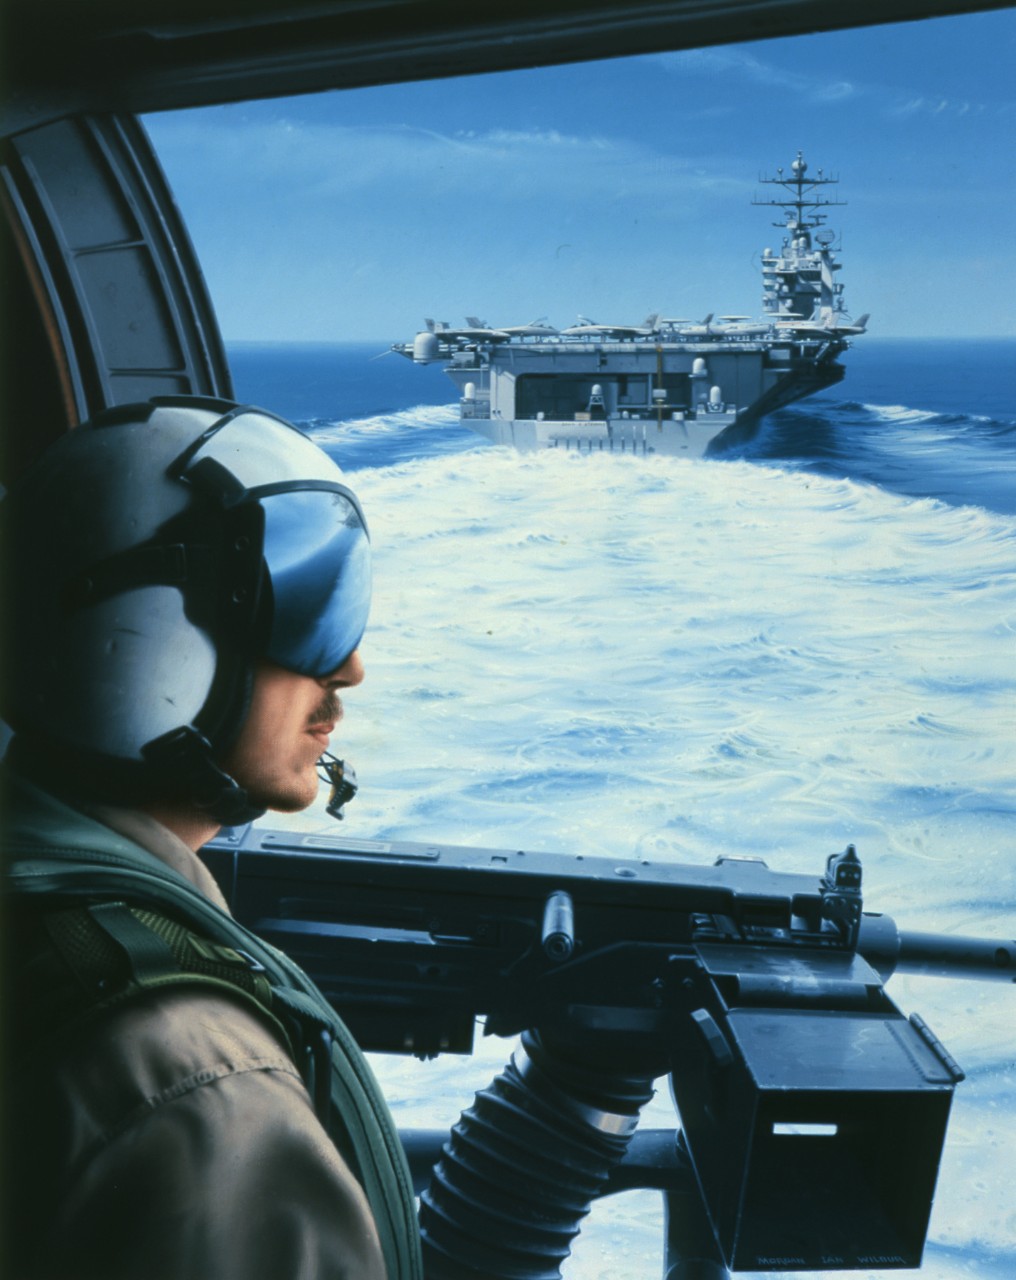 A crewman looks out the hatch of a helicopter, he is looking at the stern of an aircraft carrier